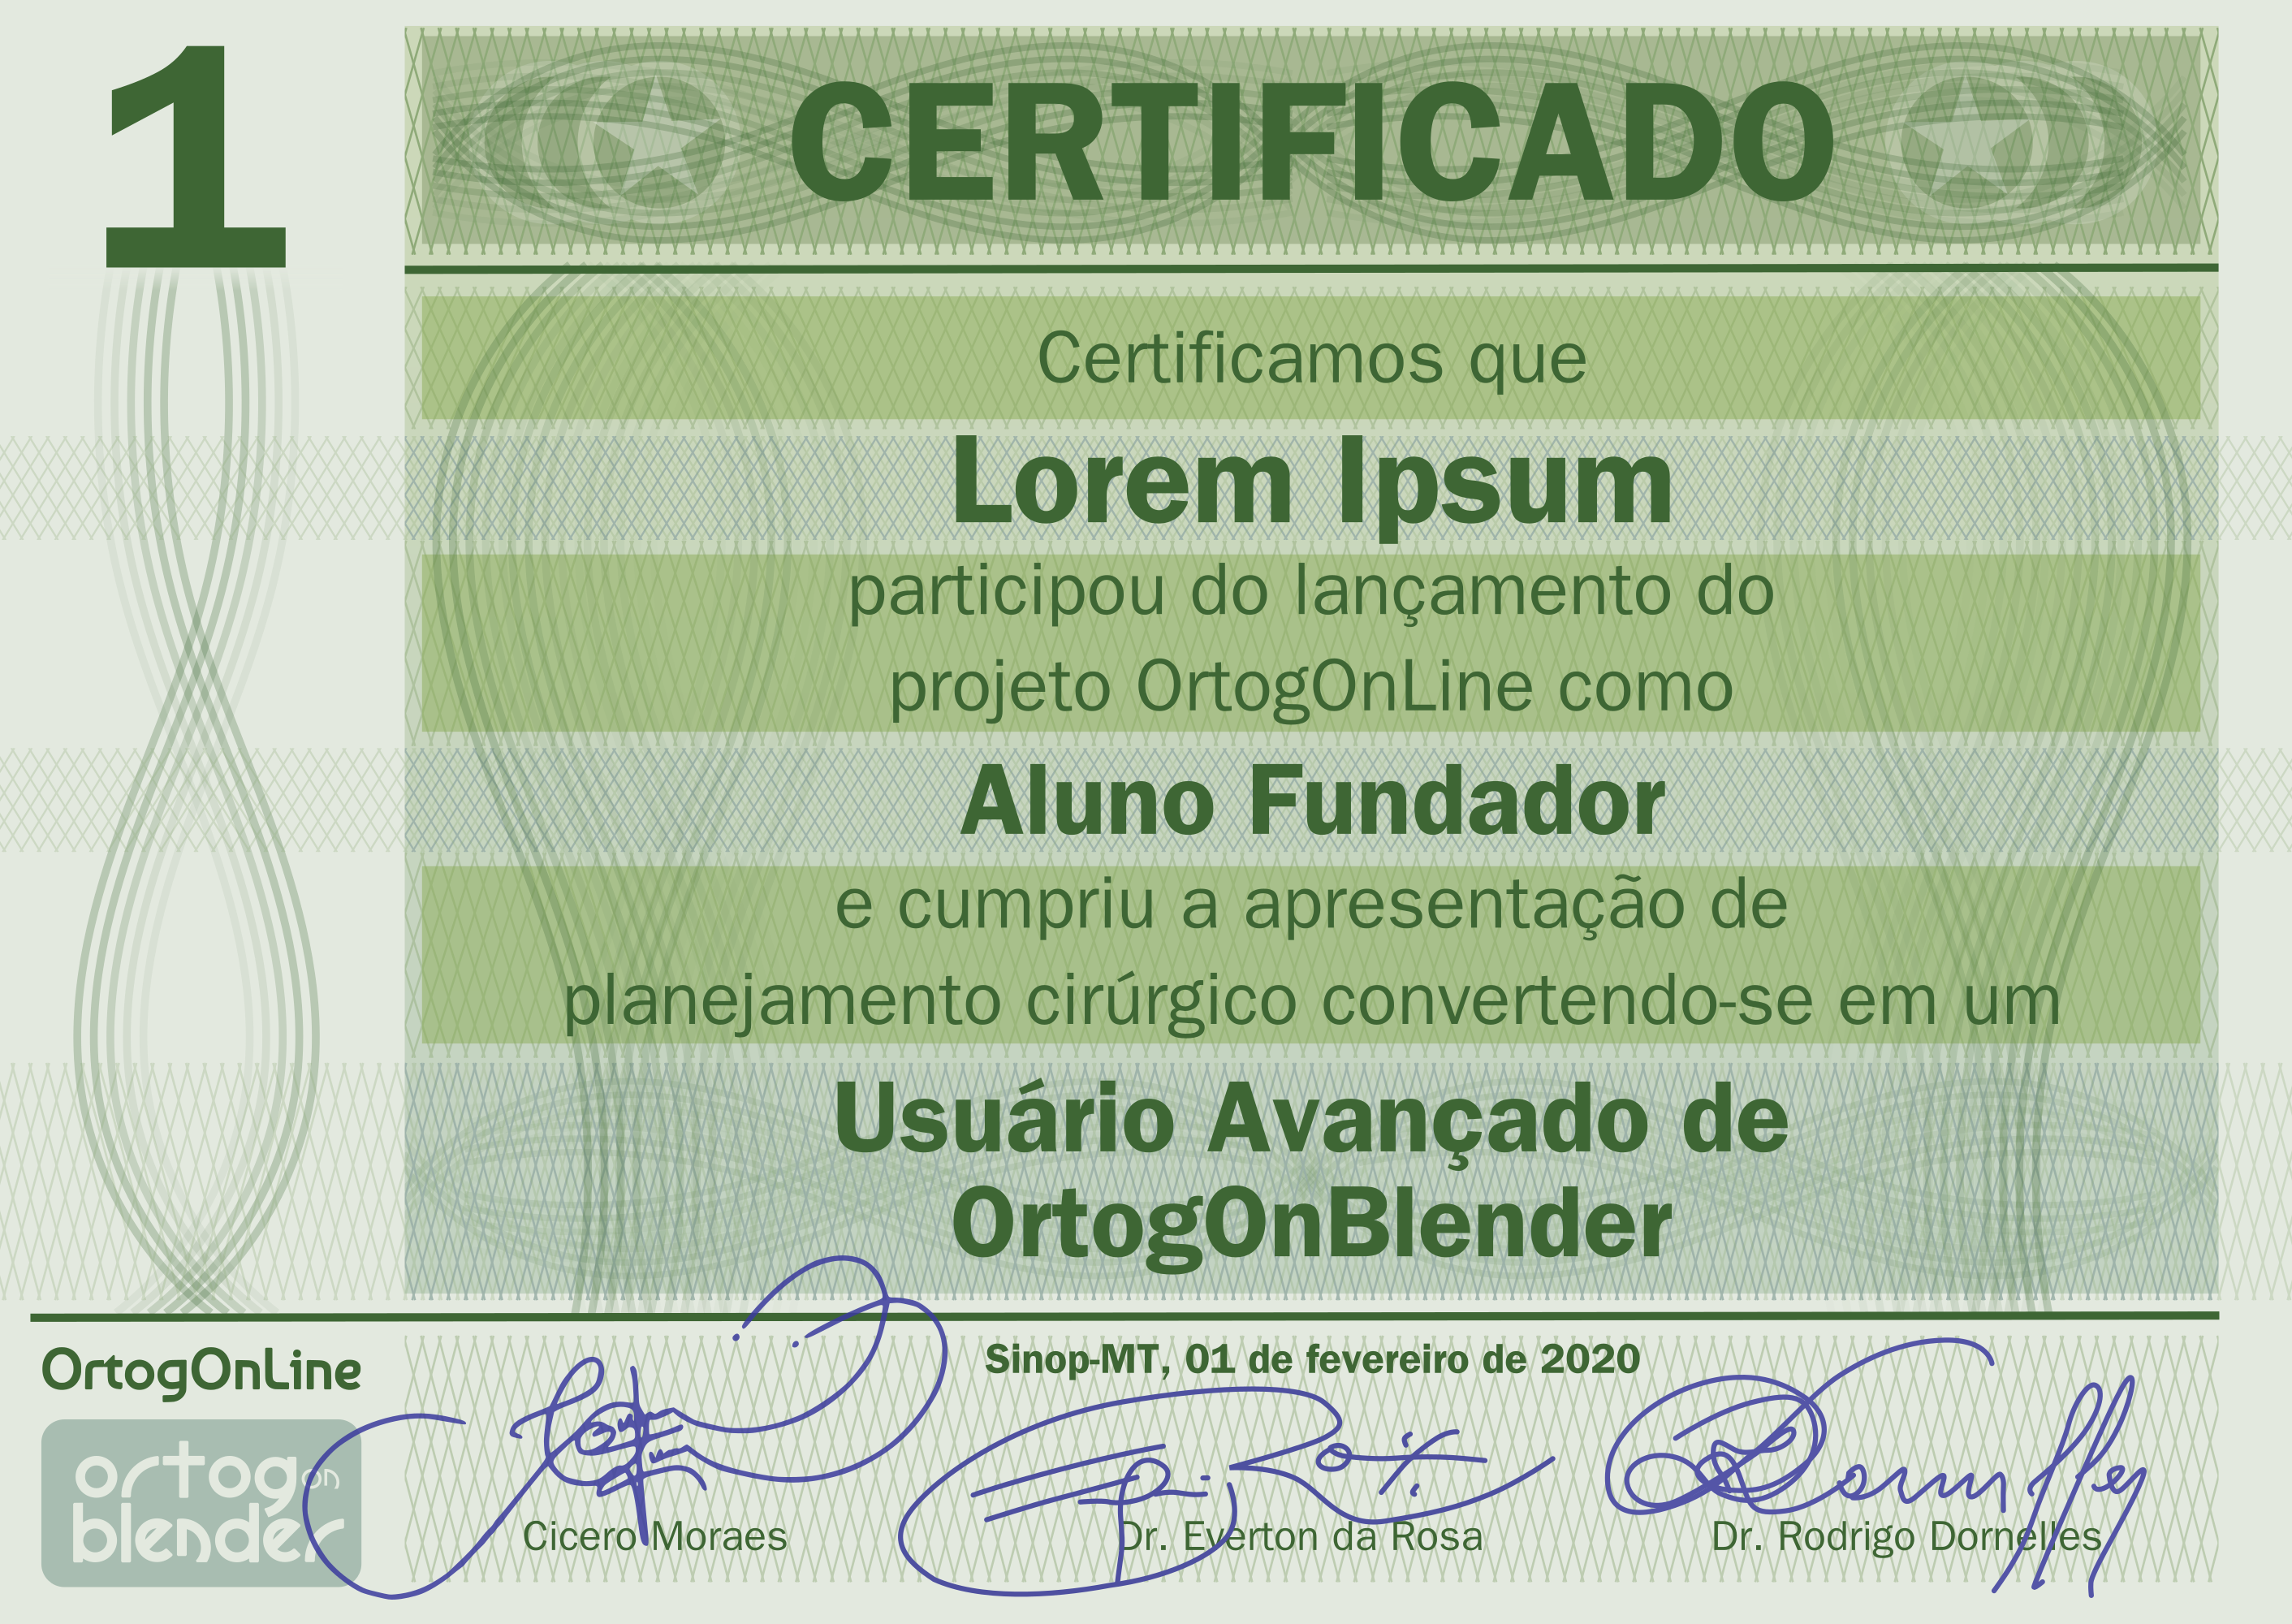 _images/Certificado.png